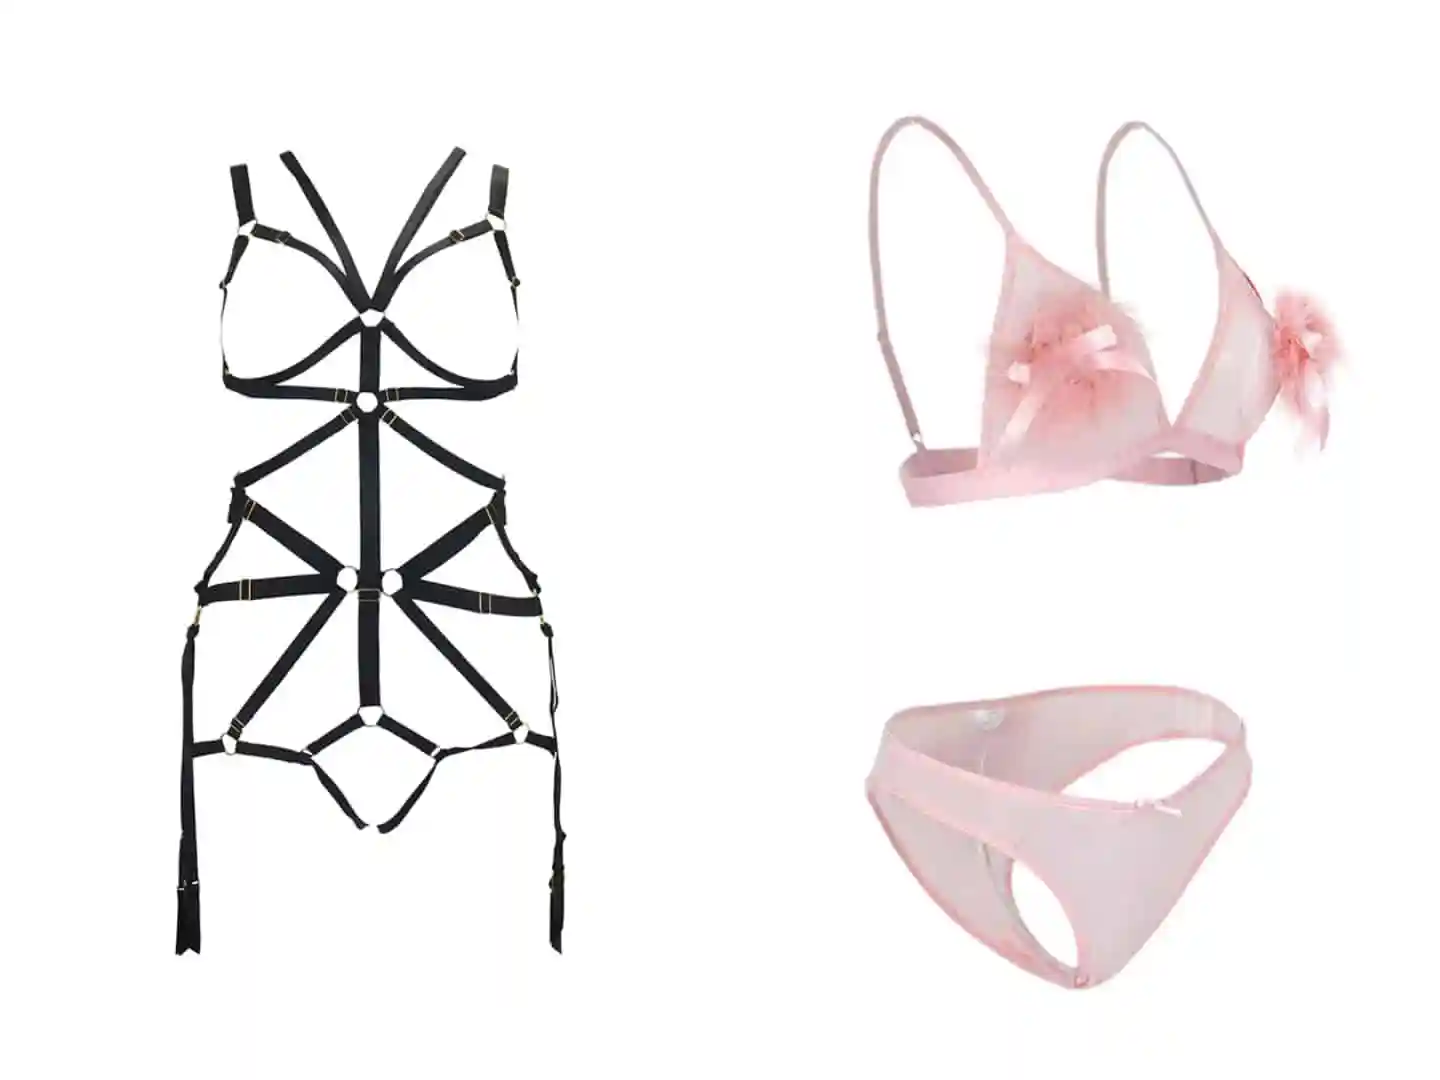 Kisskill Lingerie sells harnesses, suspenders, underwear and more for all bodies.